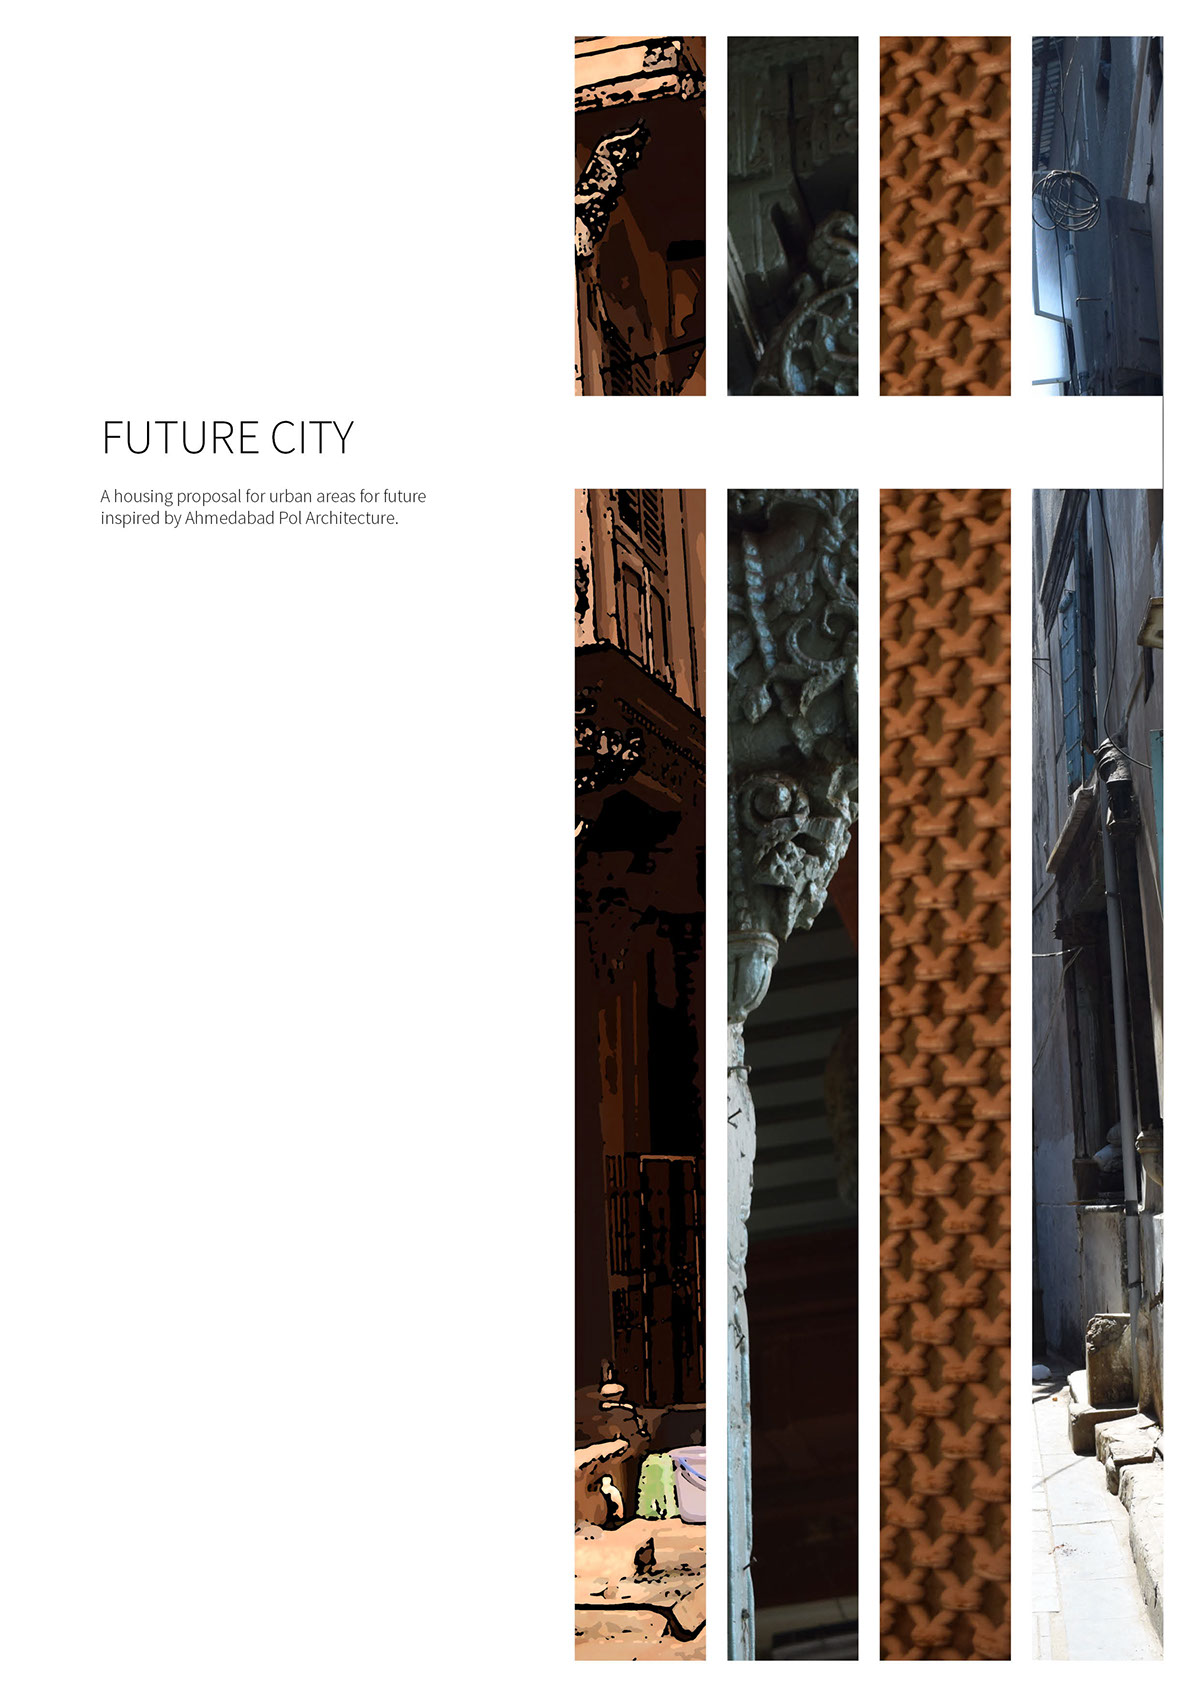 speculative design ahmedabad future Pol Housing old city housing